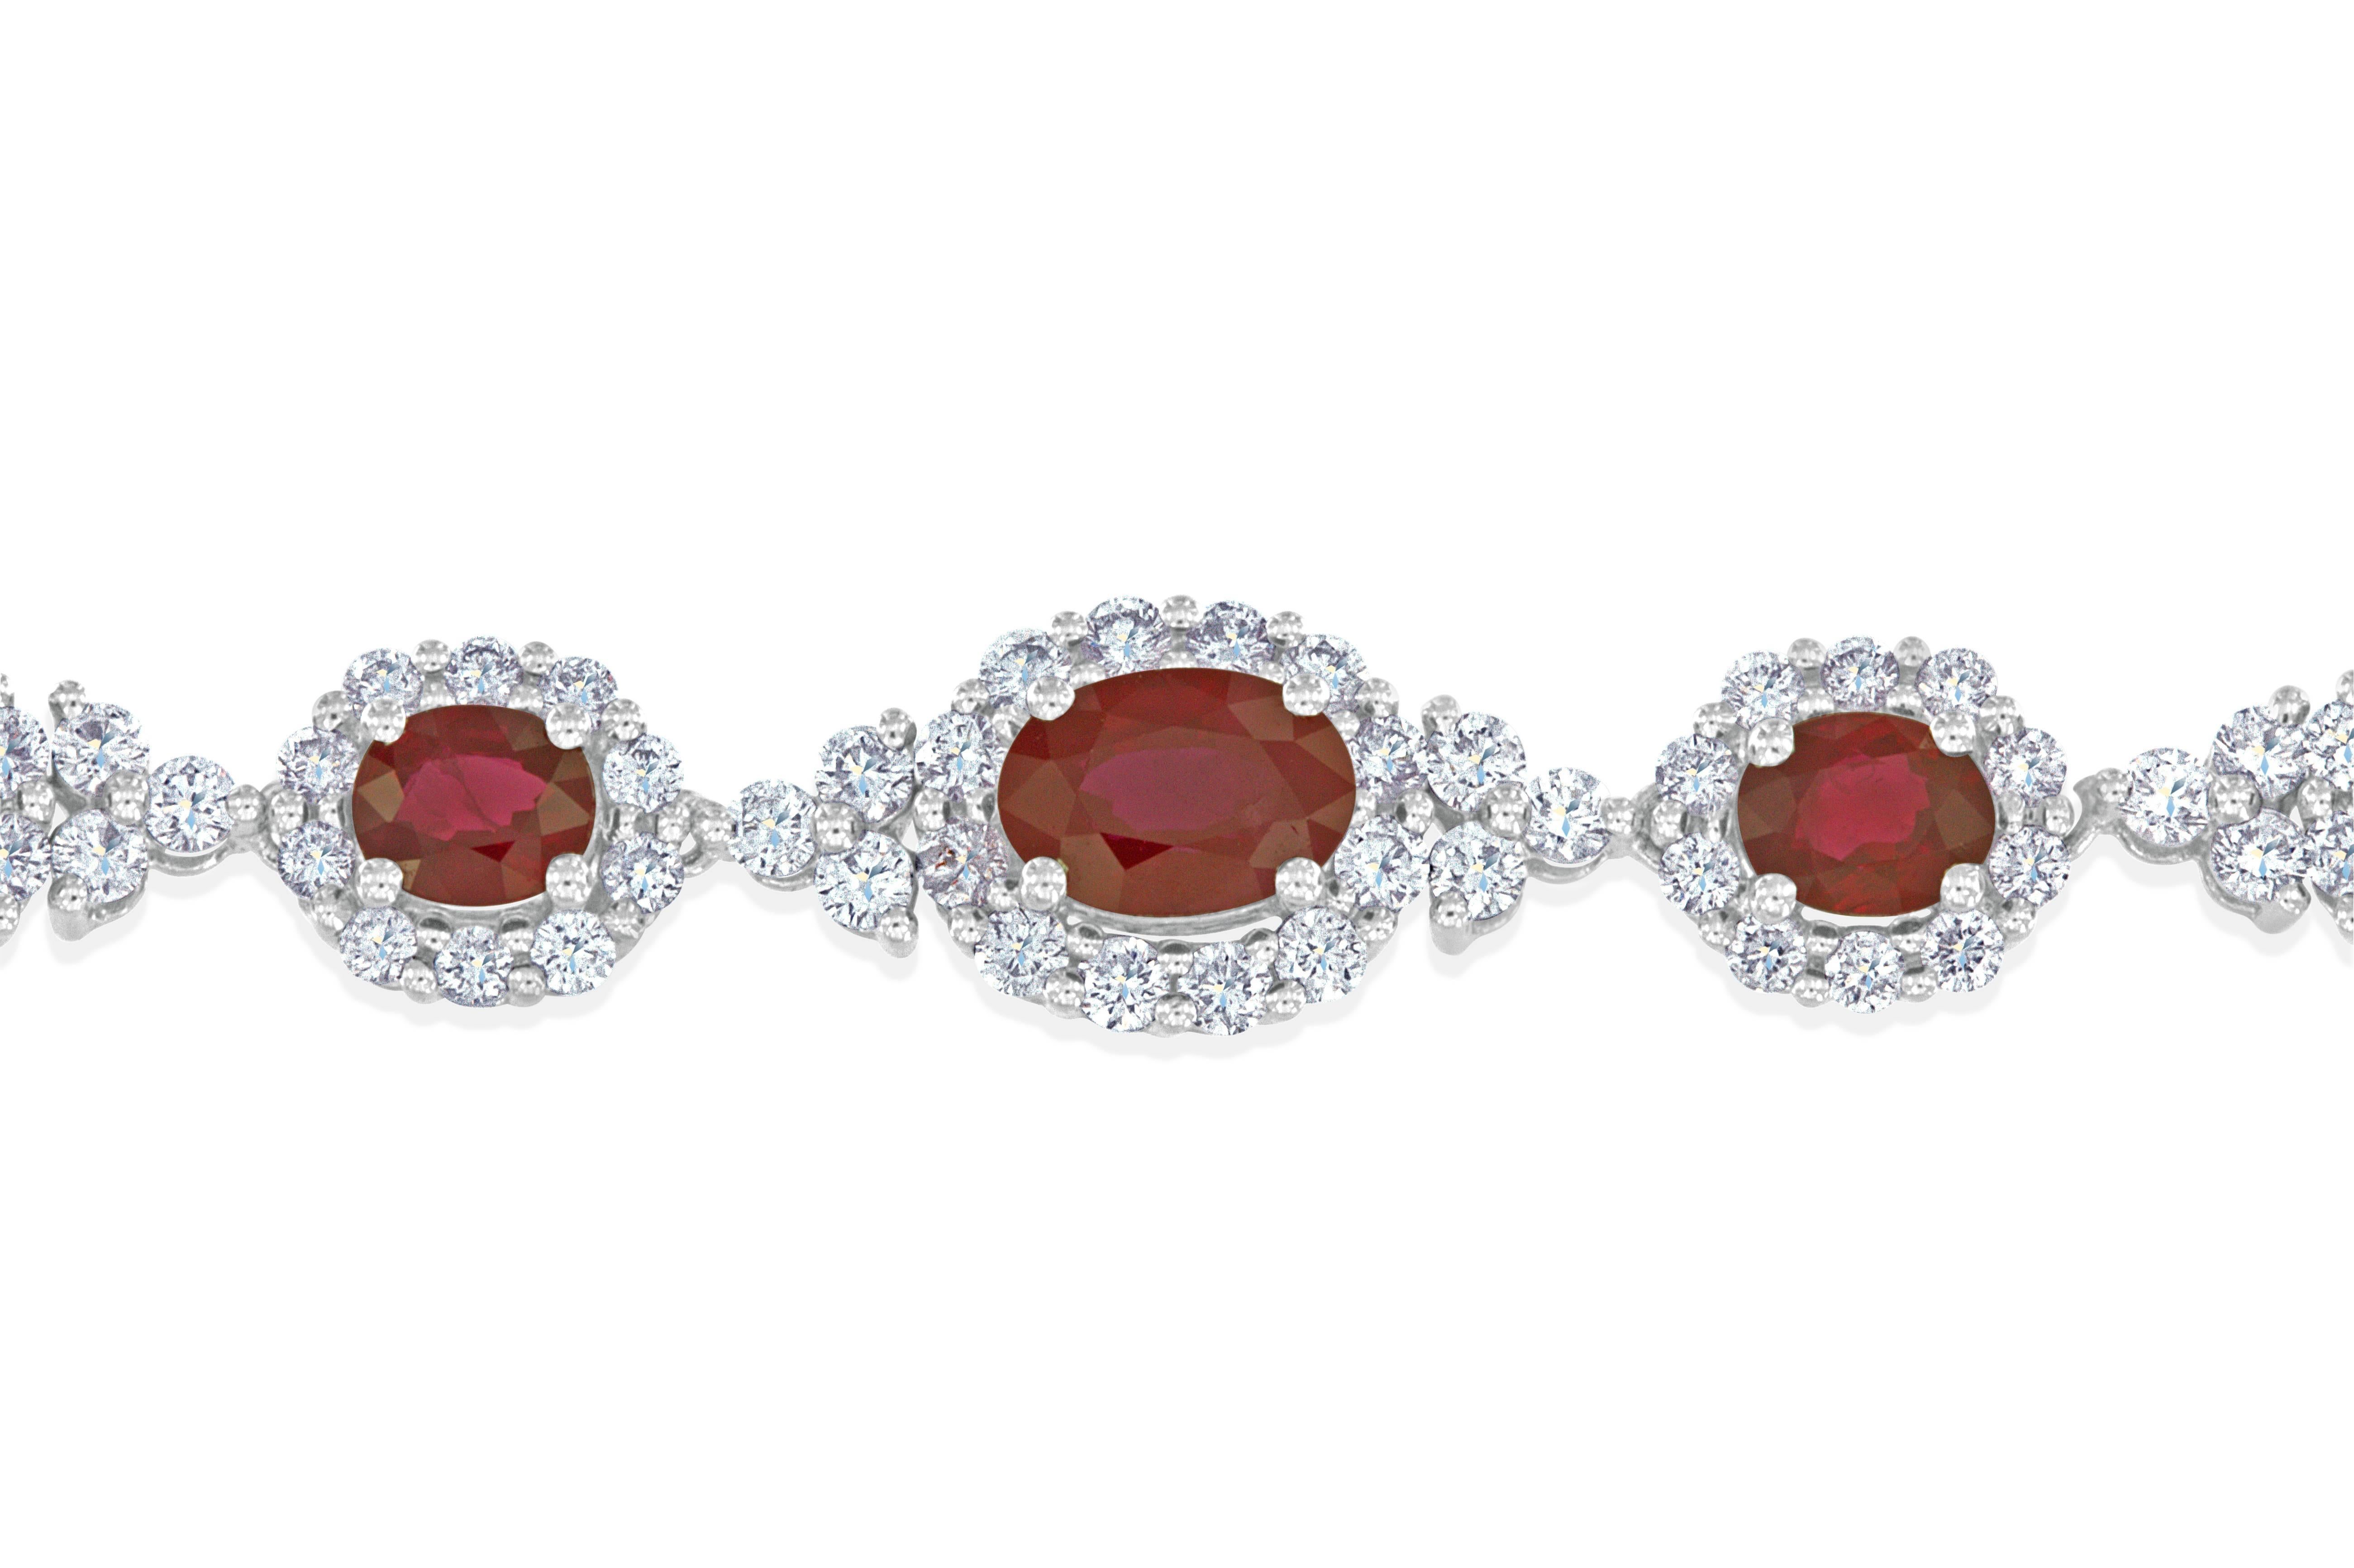 This elegant Burmese ruby and diamond bracelet features 14- oval cut Burmese rubies weighing 11.14 carats total, having excellent color and cut. Set with 224- round brilliant cut diamonds weighing 4.72 carats total, having VS clarity and G color.